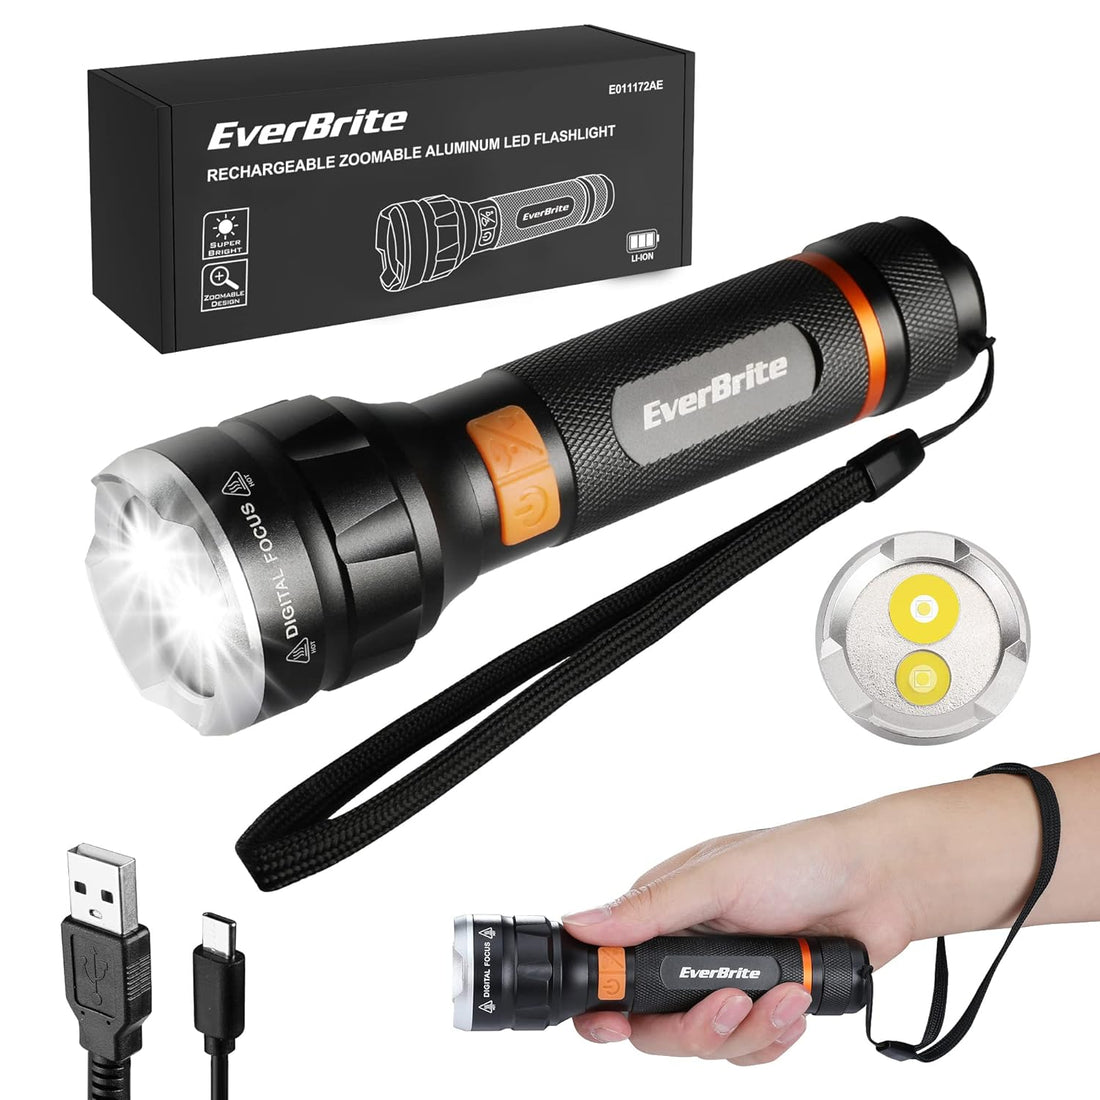 EverBrite LED Rechargeable Flashlight High Lumens, 1000 Lumens, Zoomable Aluminum Flashlight with Digital Focus, 4 Modes, Water Resistant, Adjustable Brightness for Camping, Running, Emergency